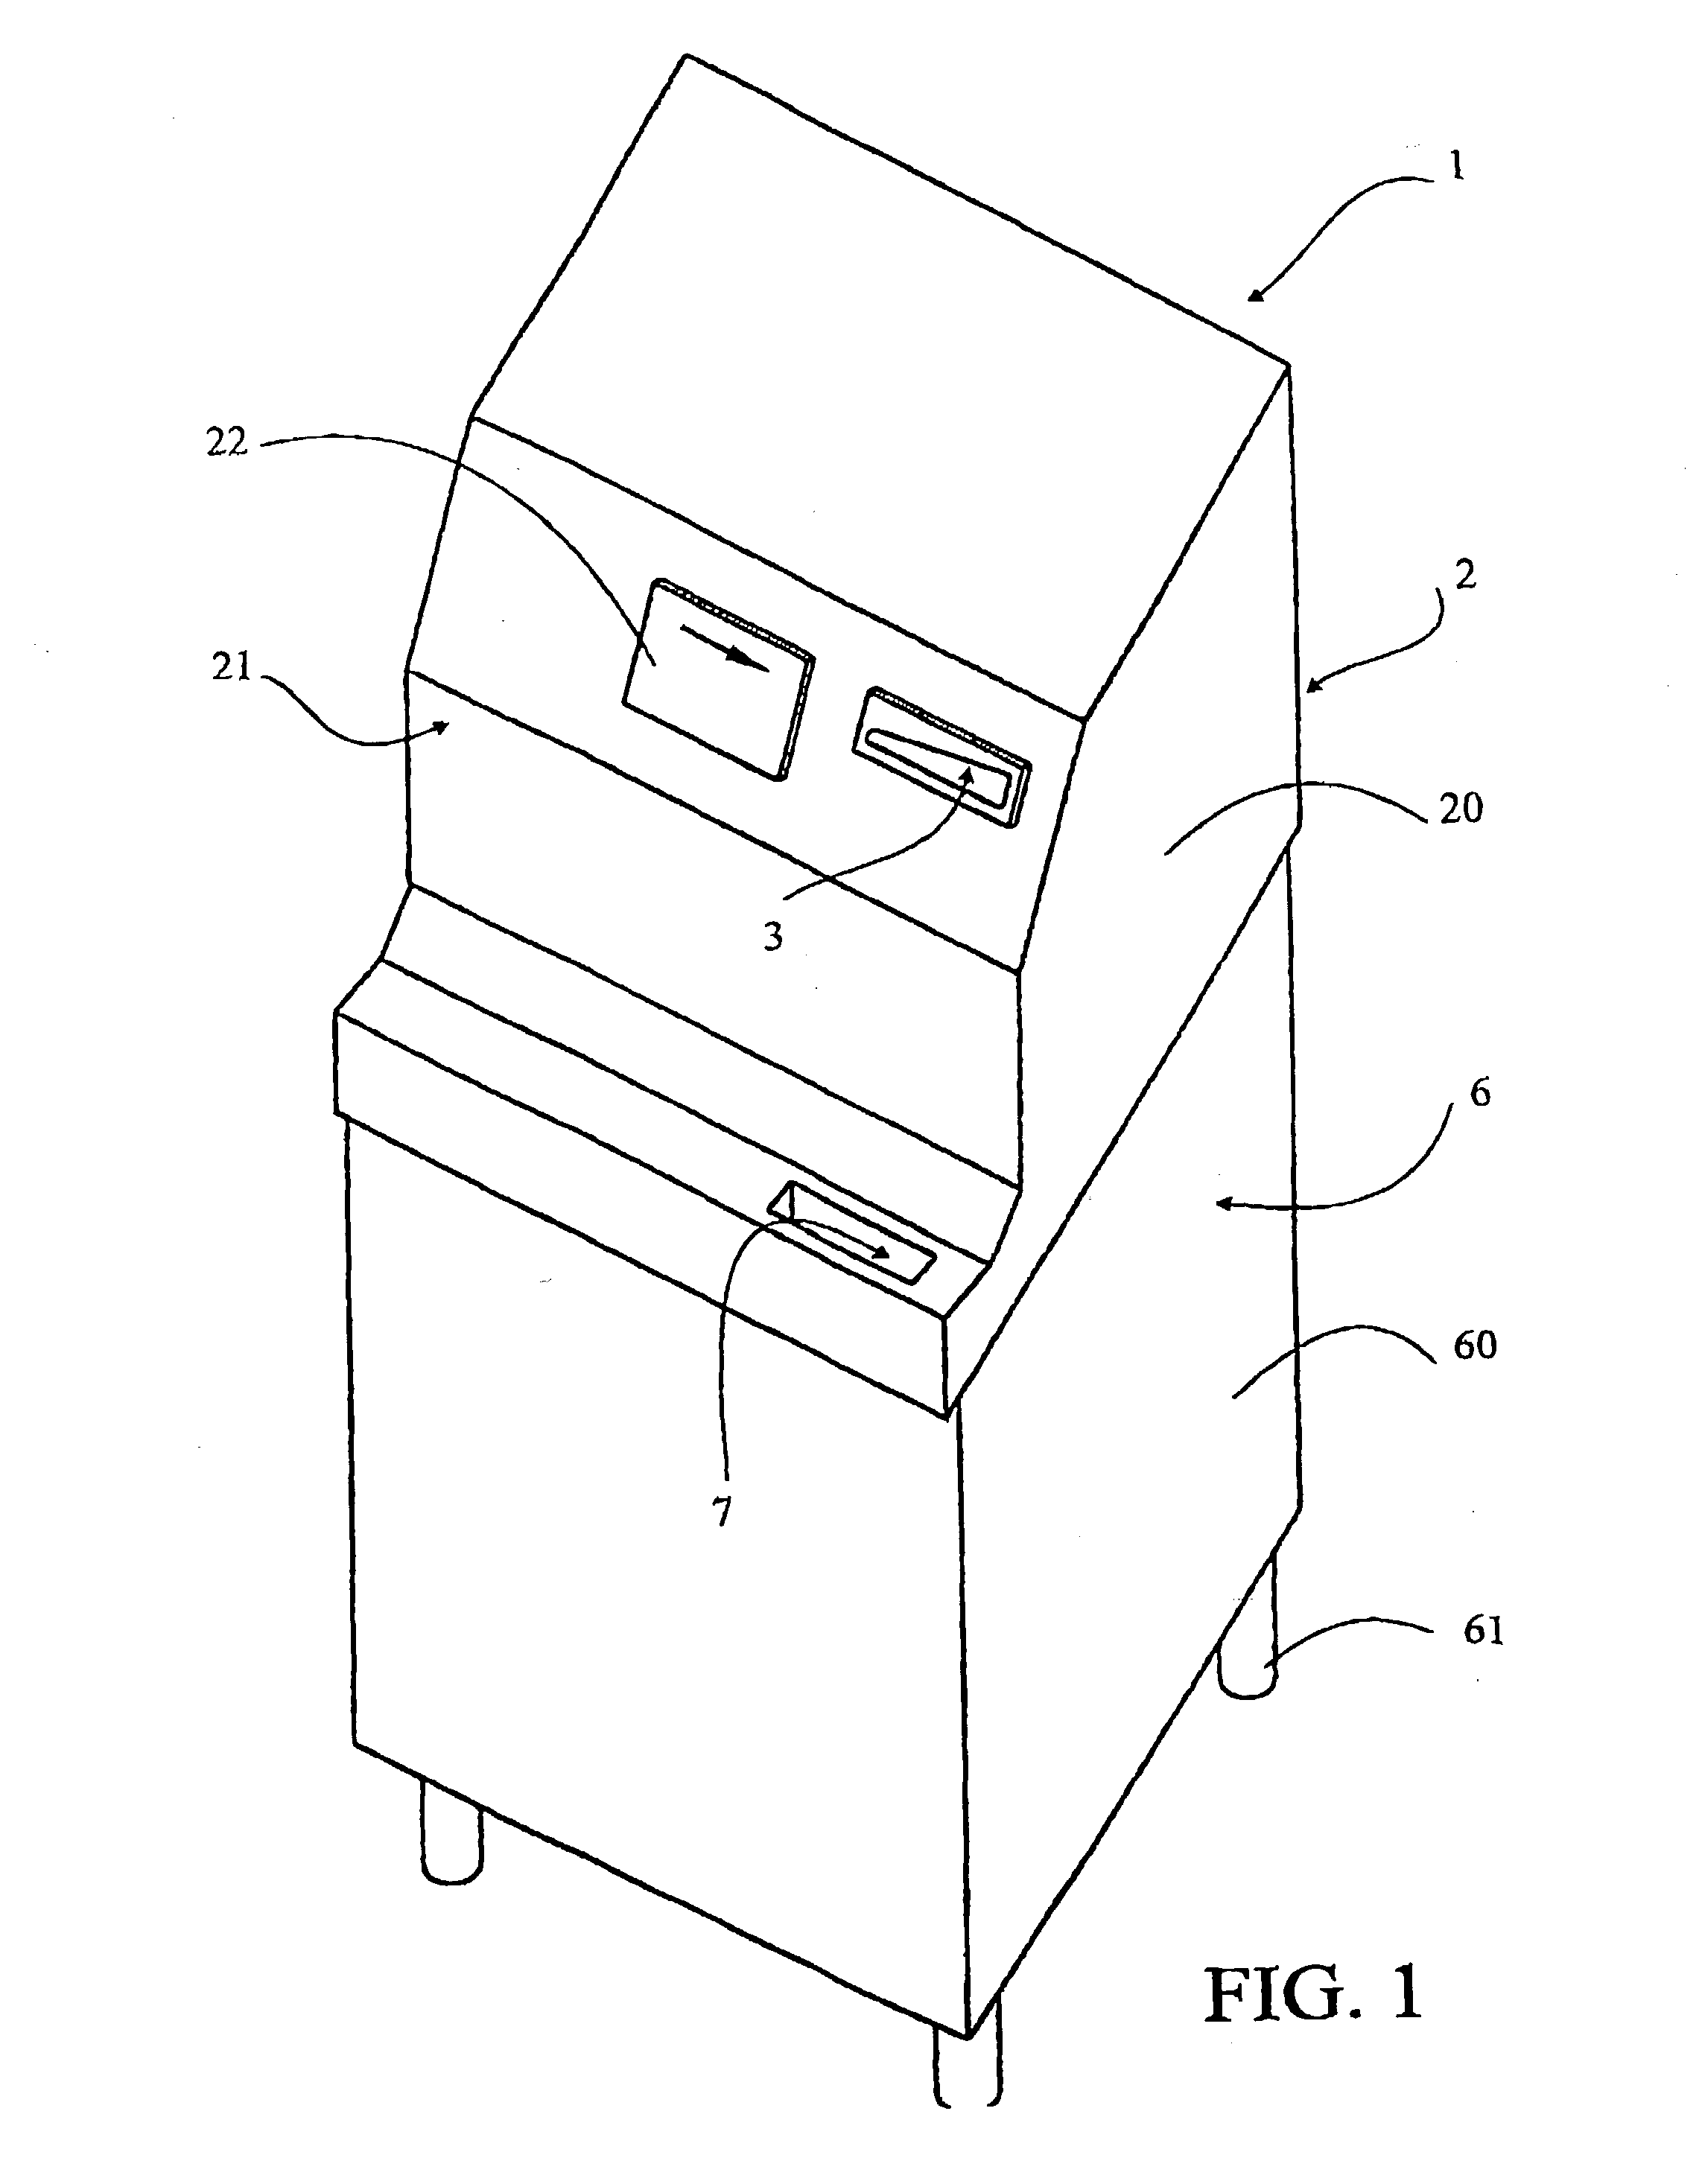 Apparatus dispensing rechargeable refrigerating elements